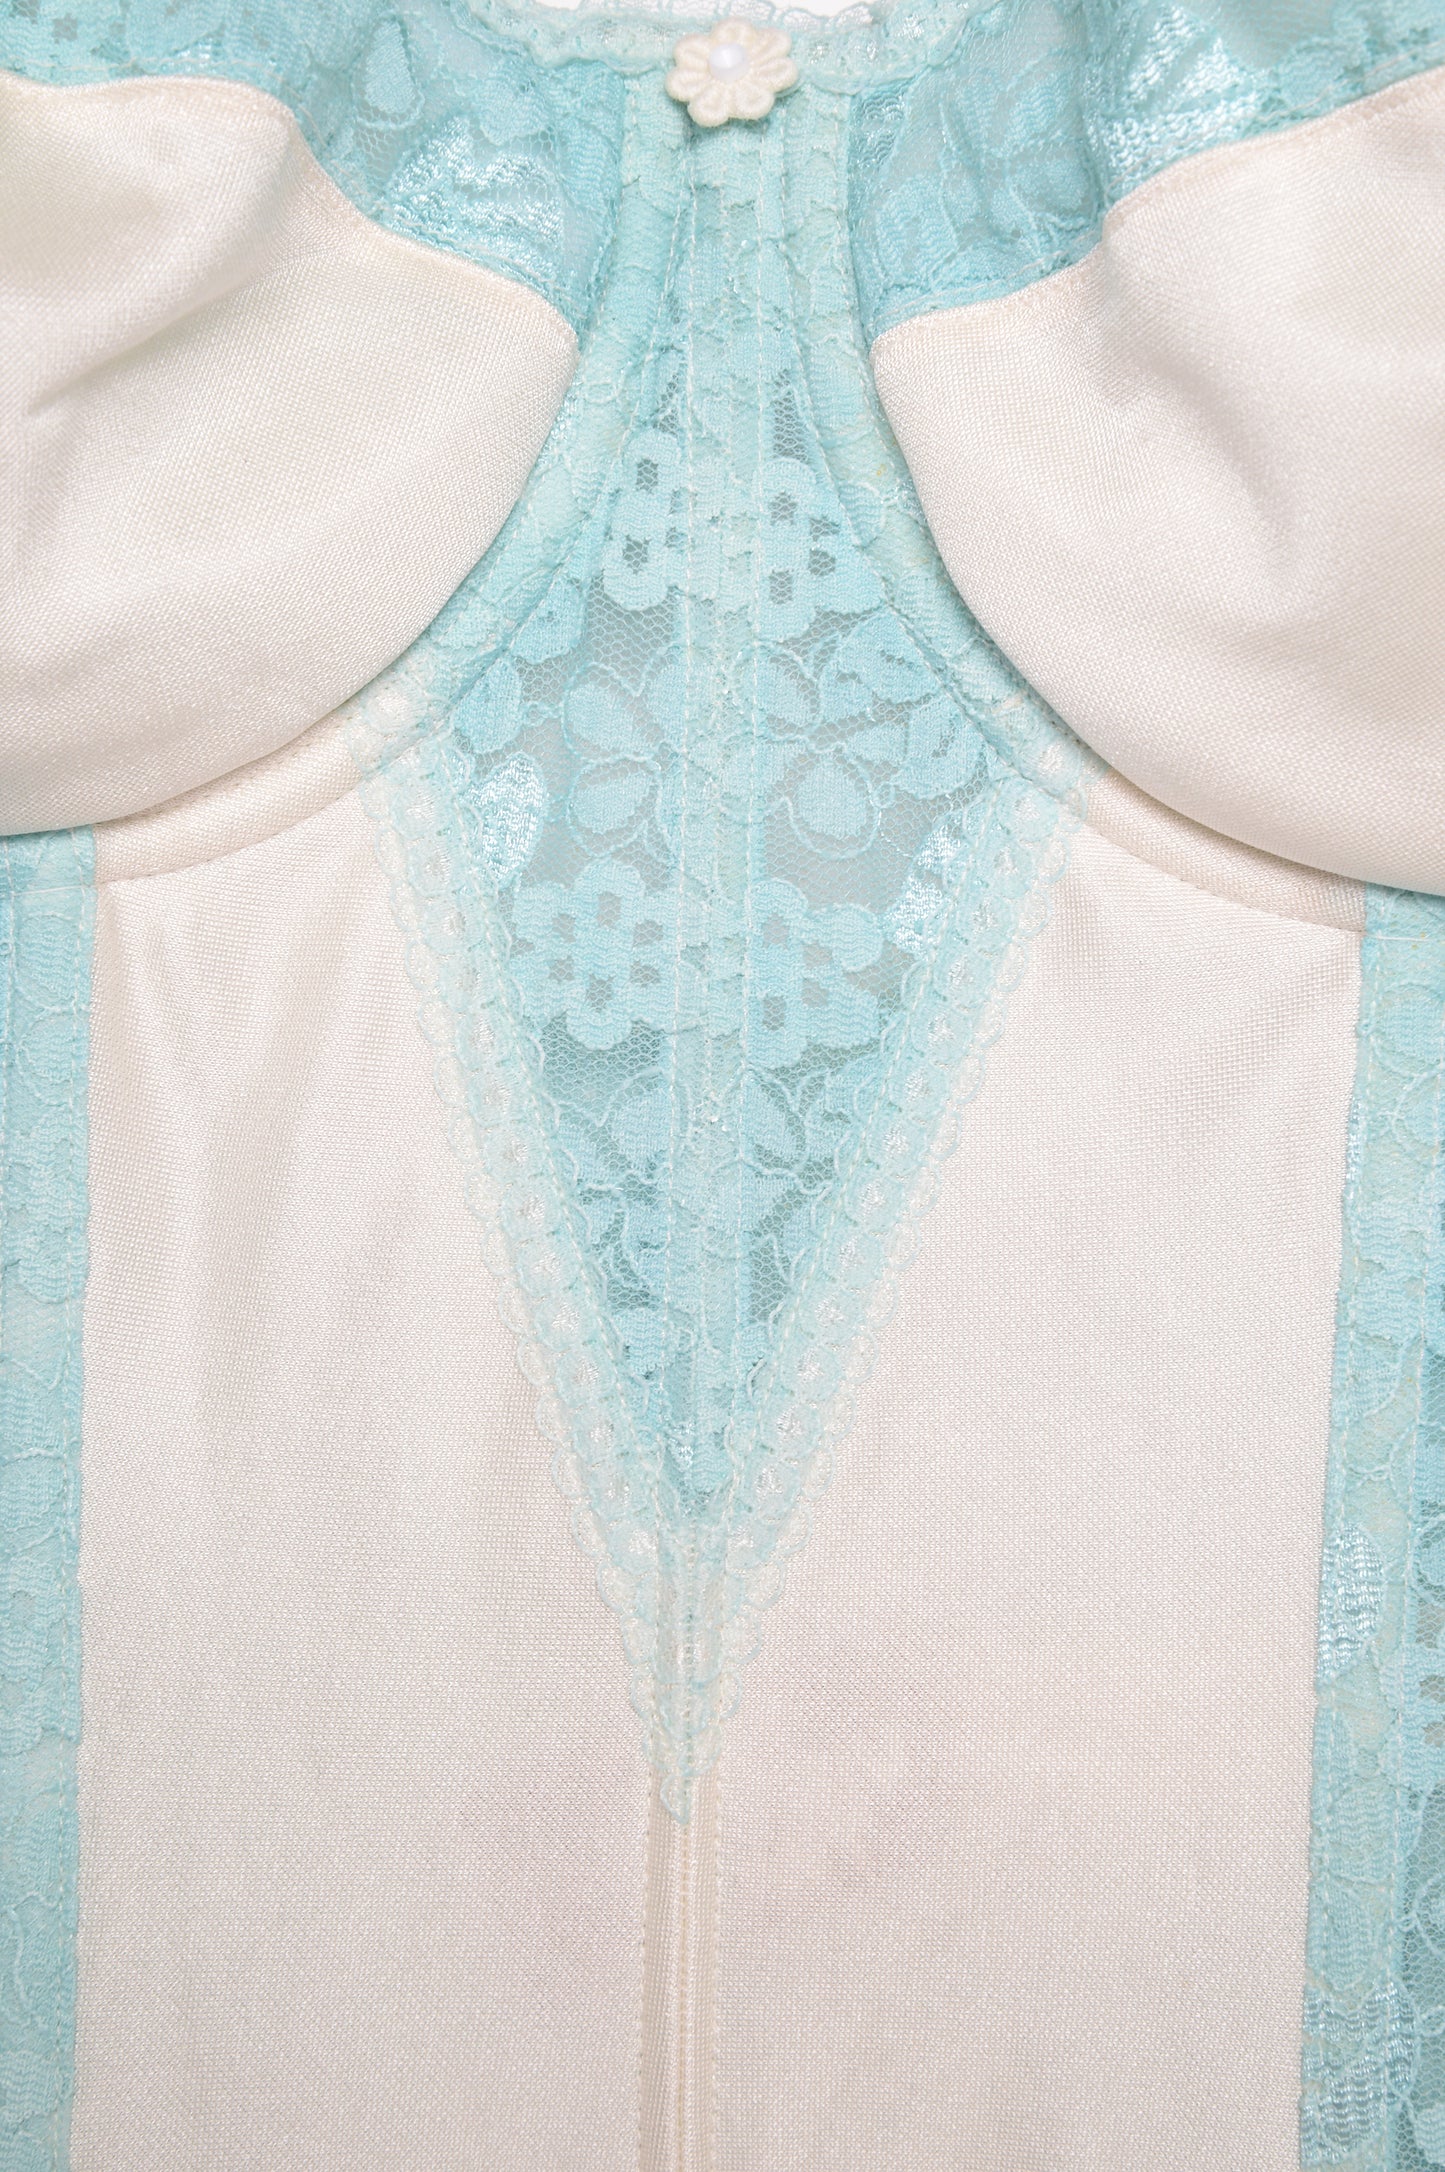 Hand-Dyed Lace Corset Top